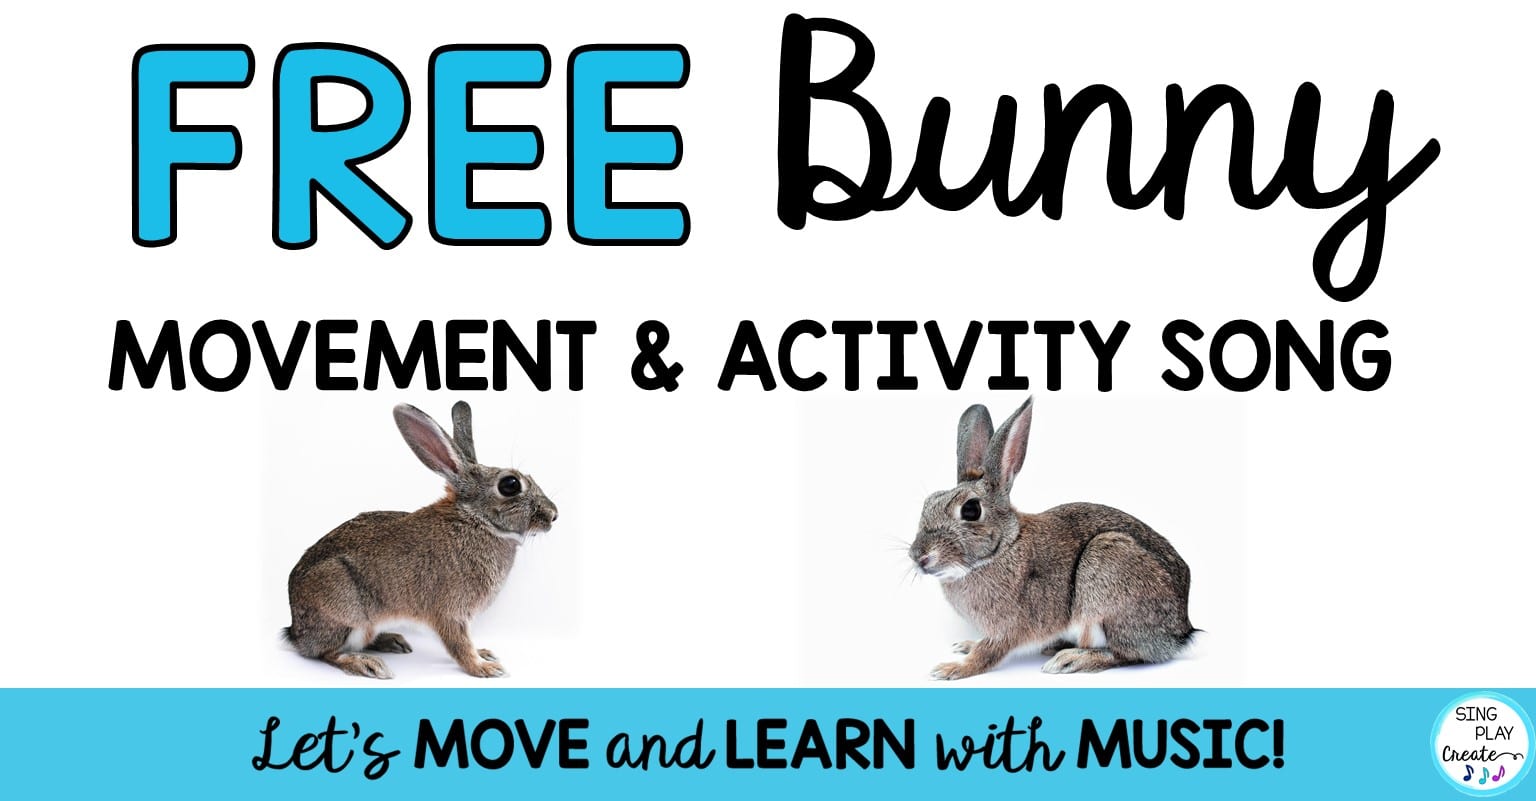 You are currently viewing Free Bunny Movement Activity Song